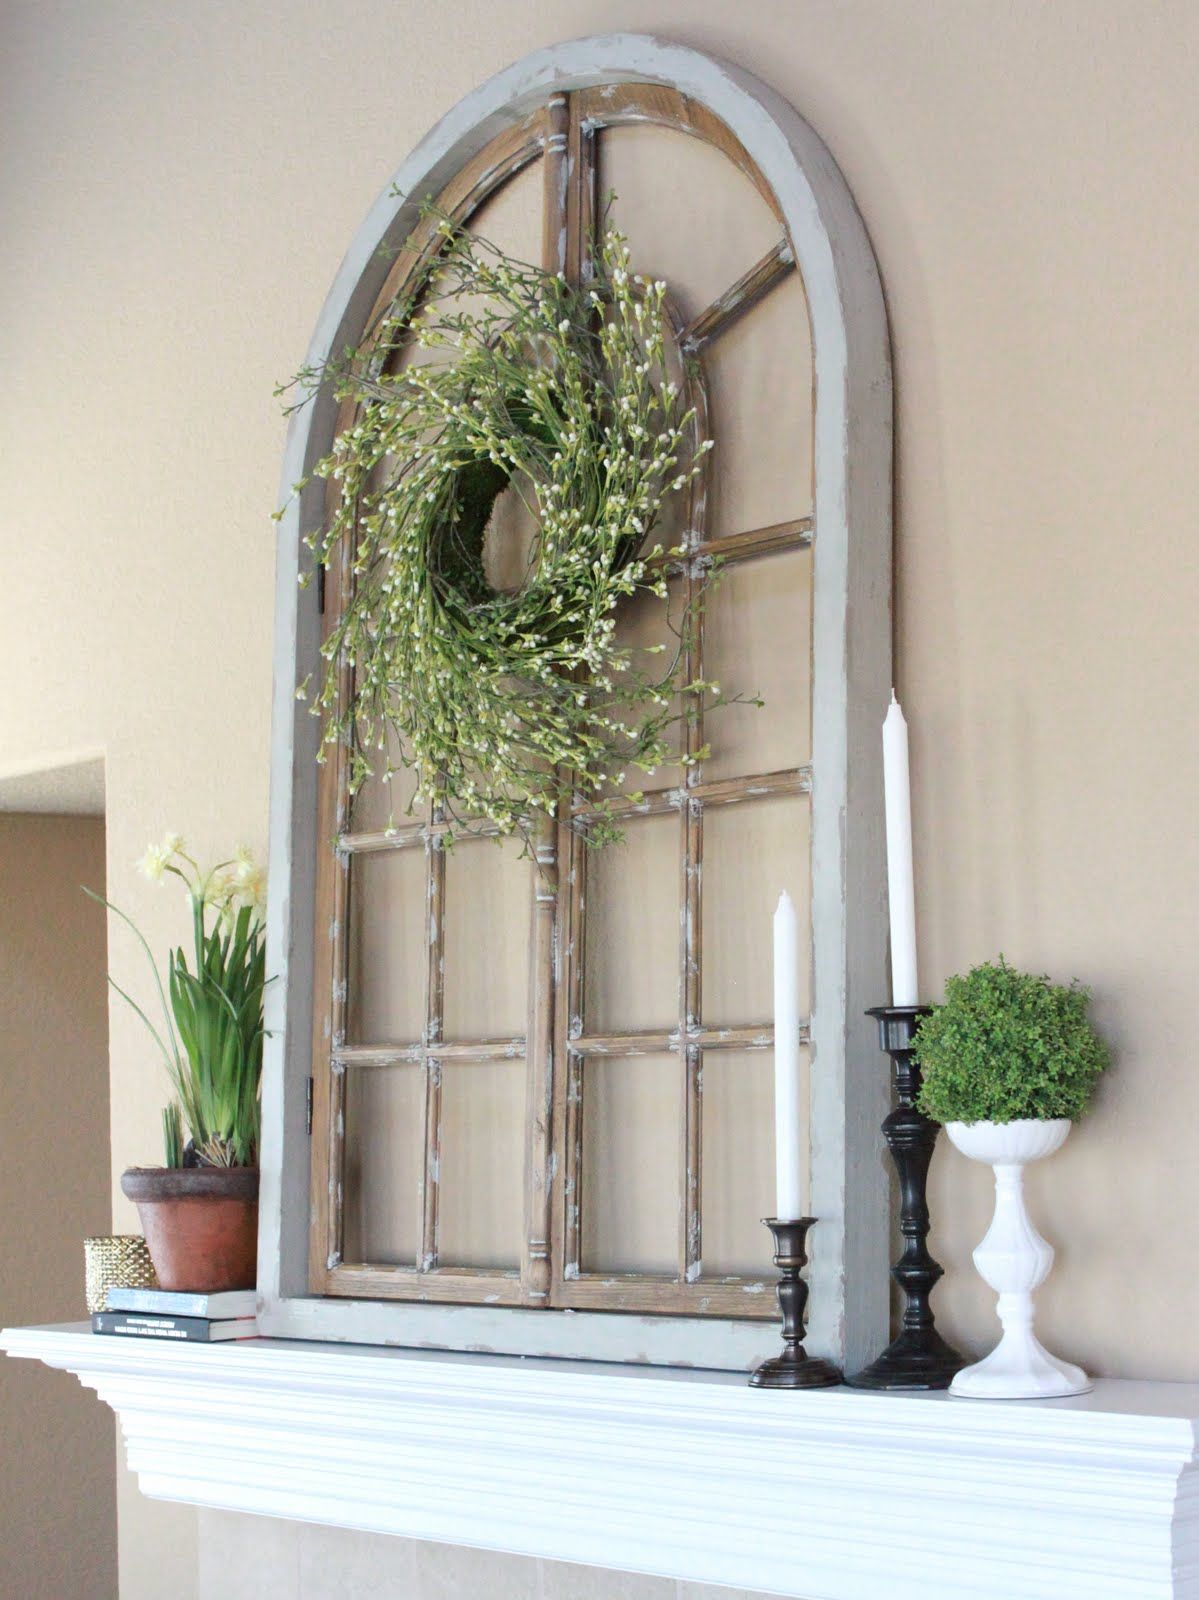 Stunning Fireplace mantel decor with an arched window frame rustic window frame wall decor